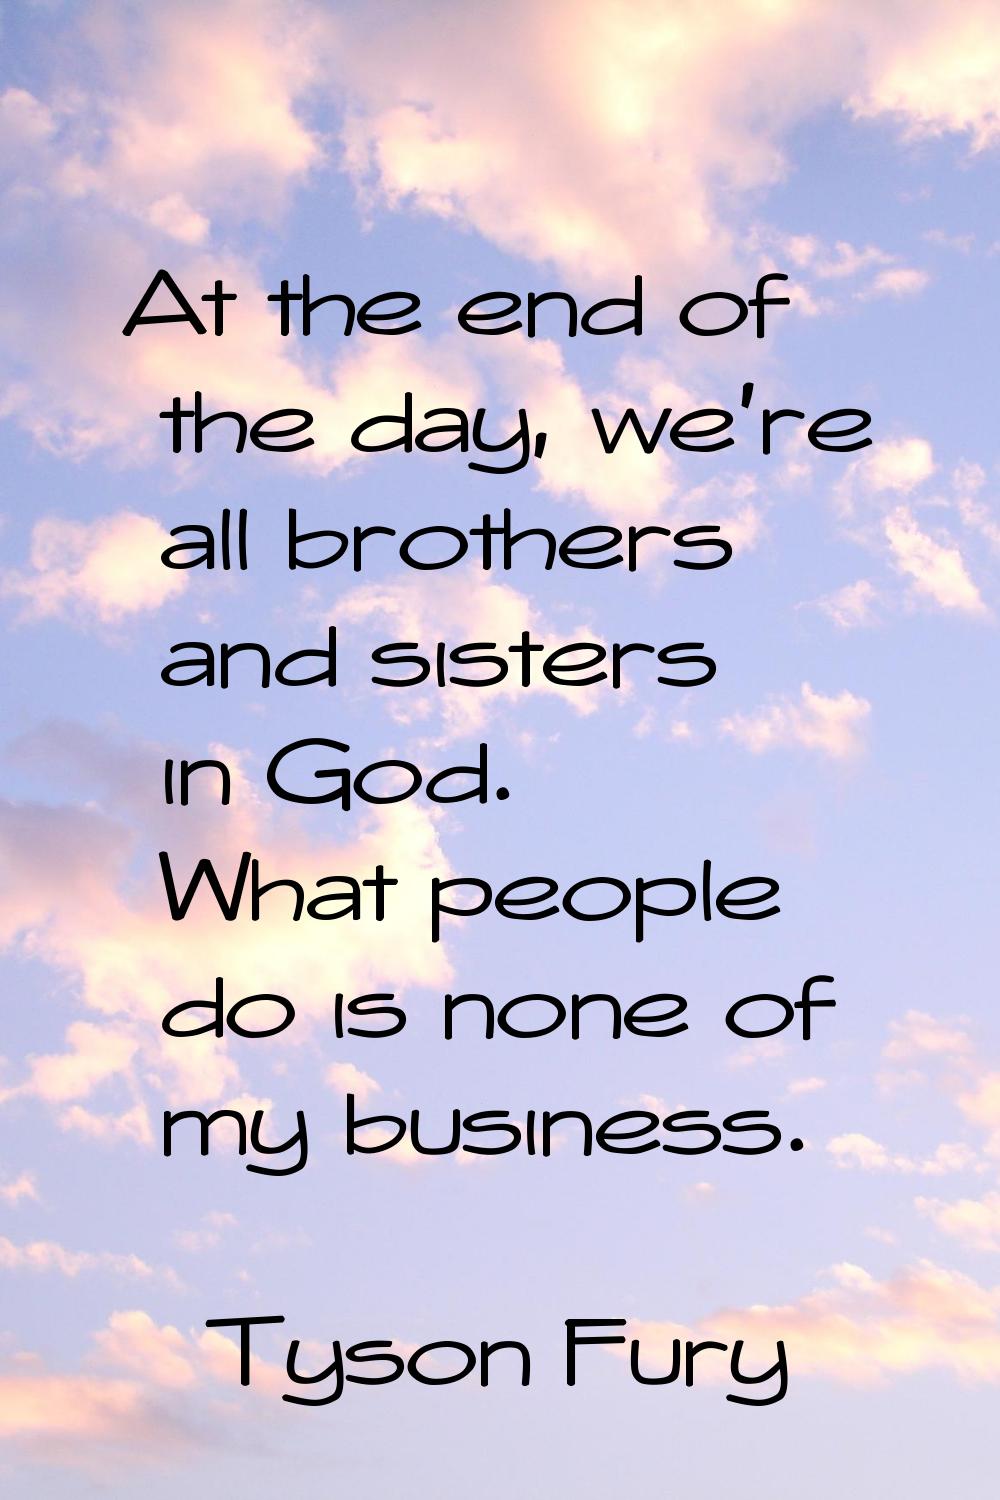 At the end of the day, we're all brothers and sisters in God. What people do is none of my business